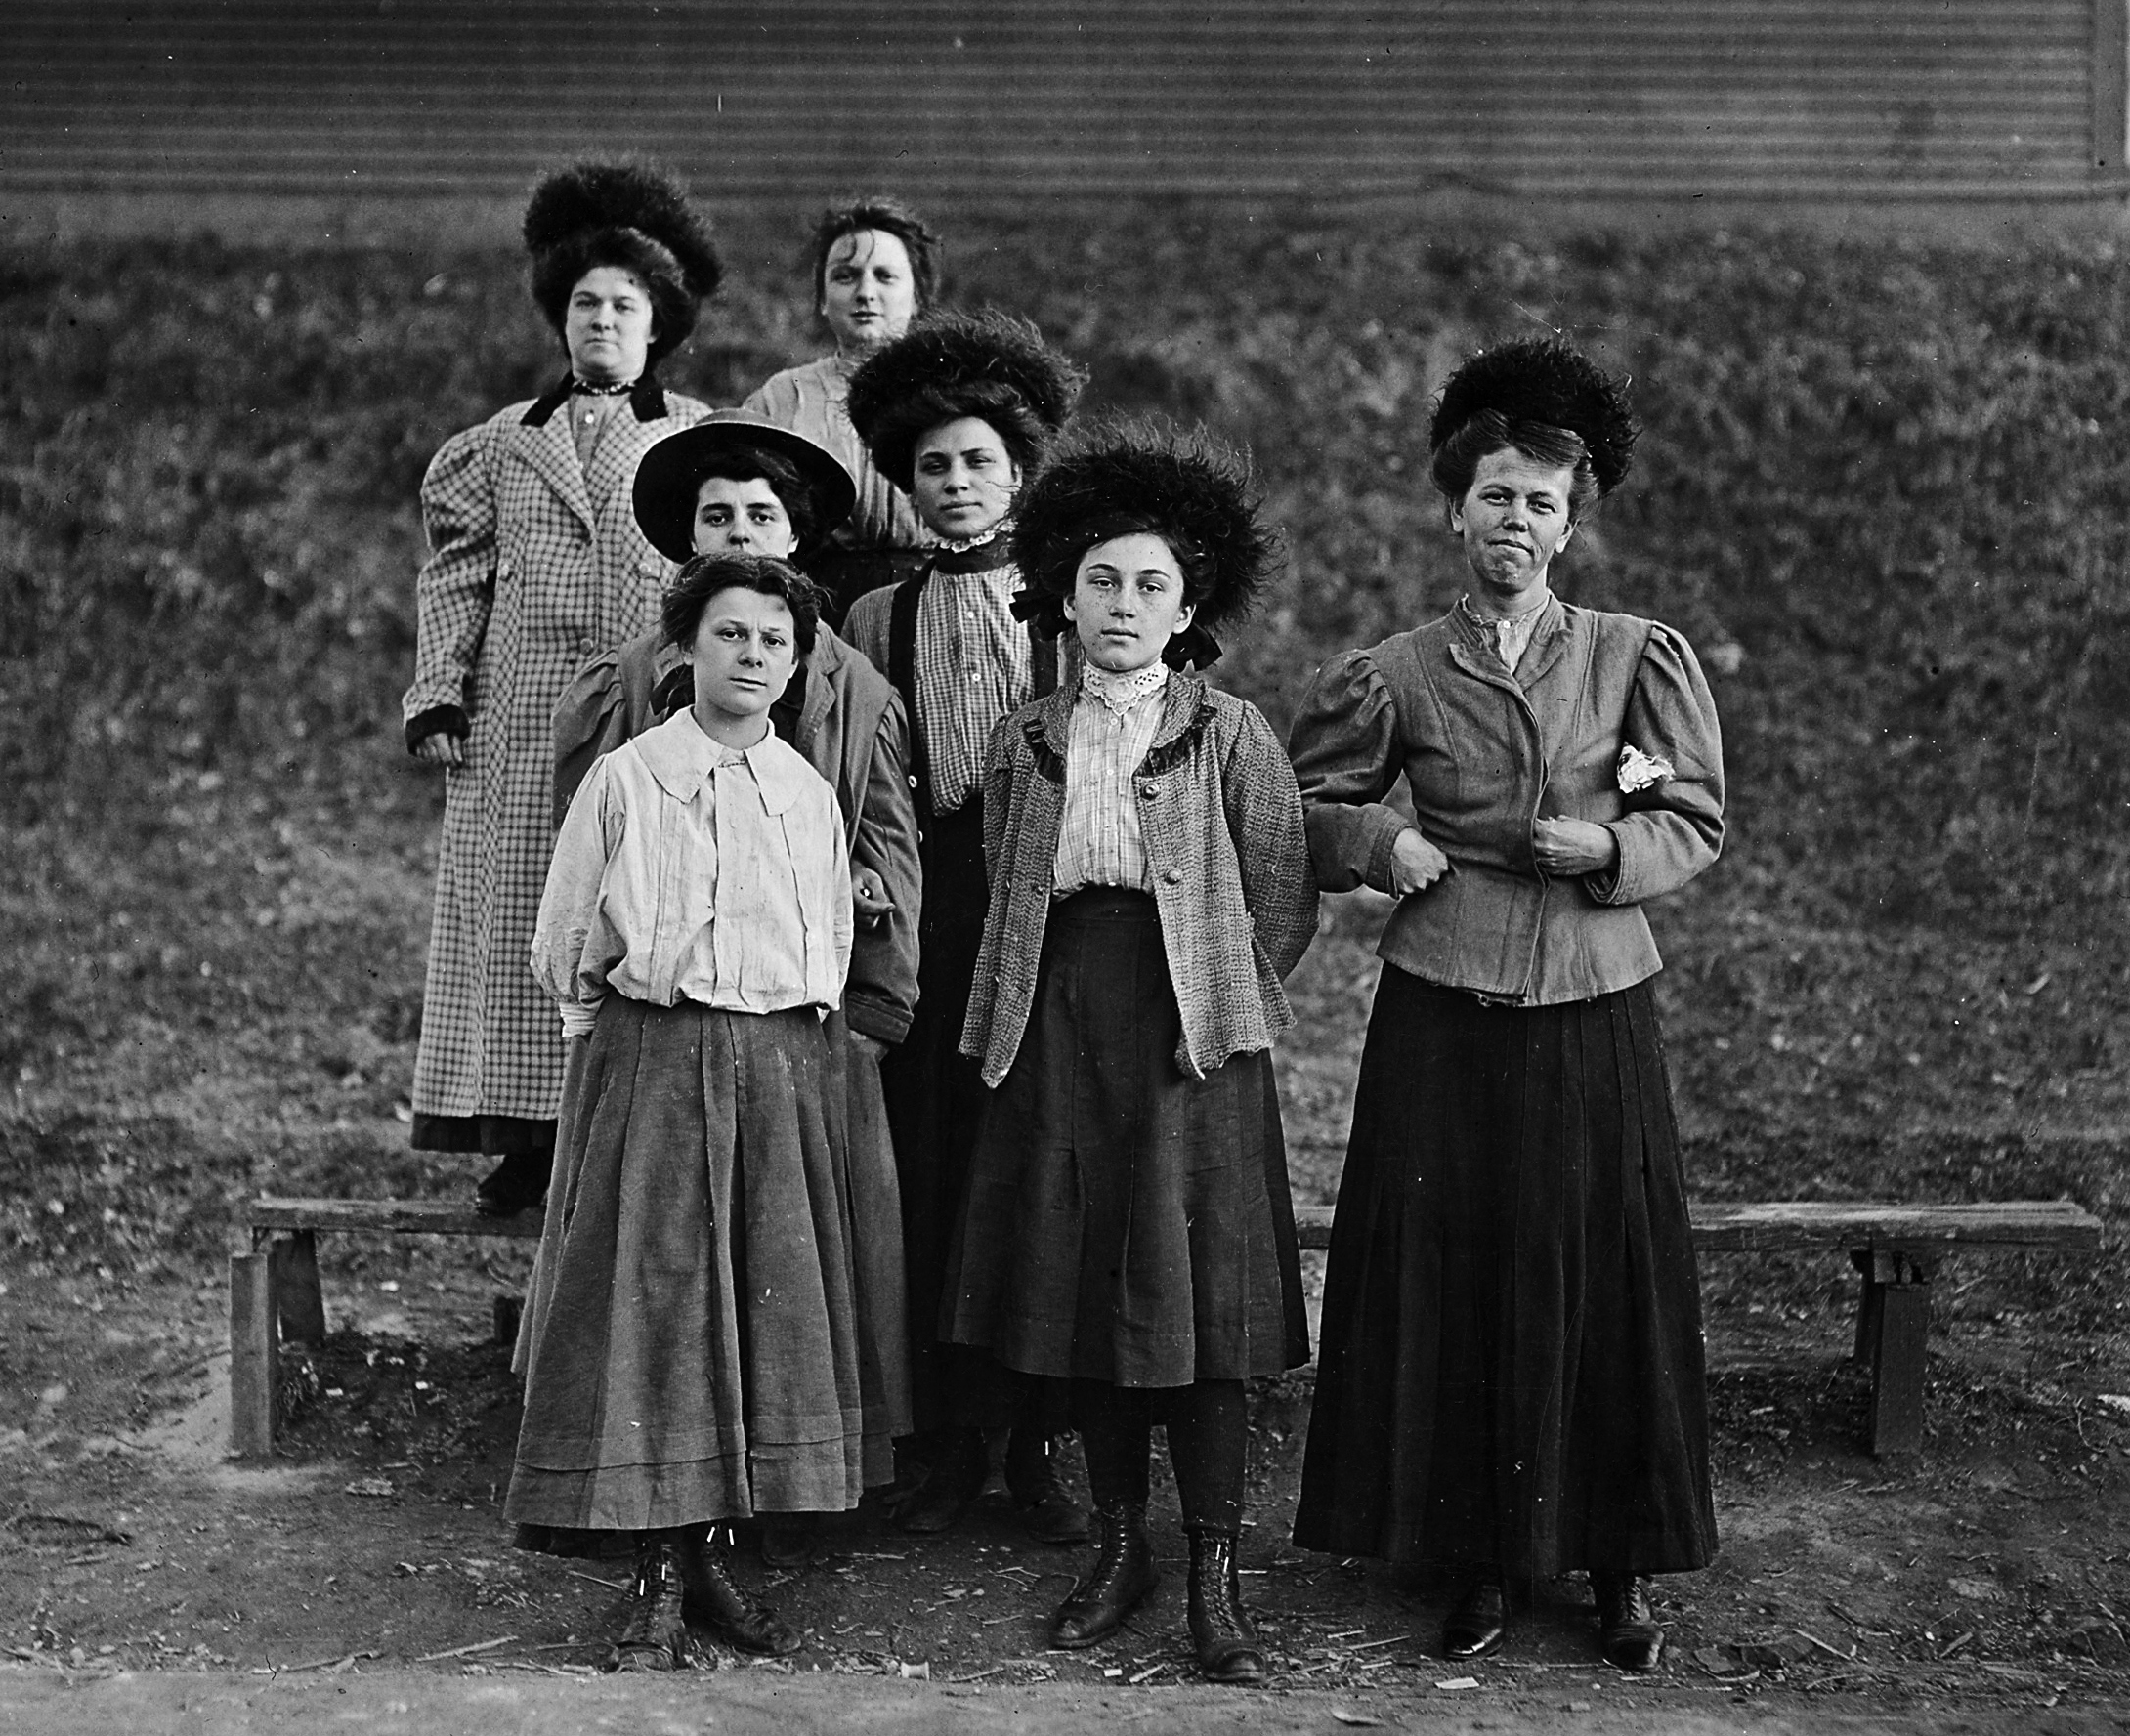 Young girls work in the Chace Cotton Mill - NARA - 523187